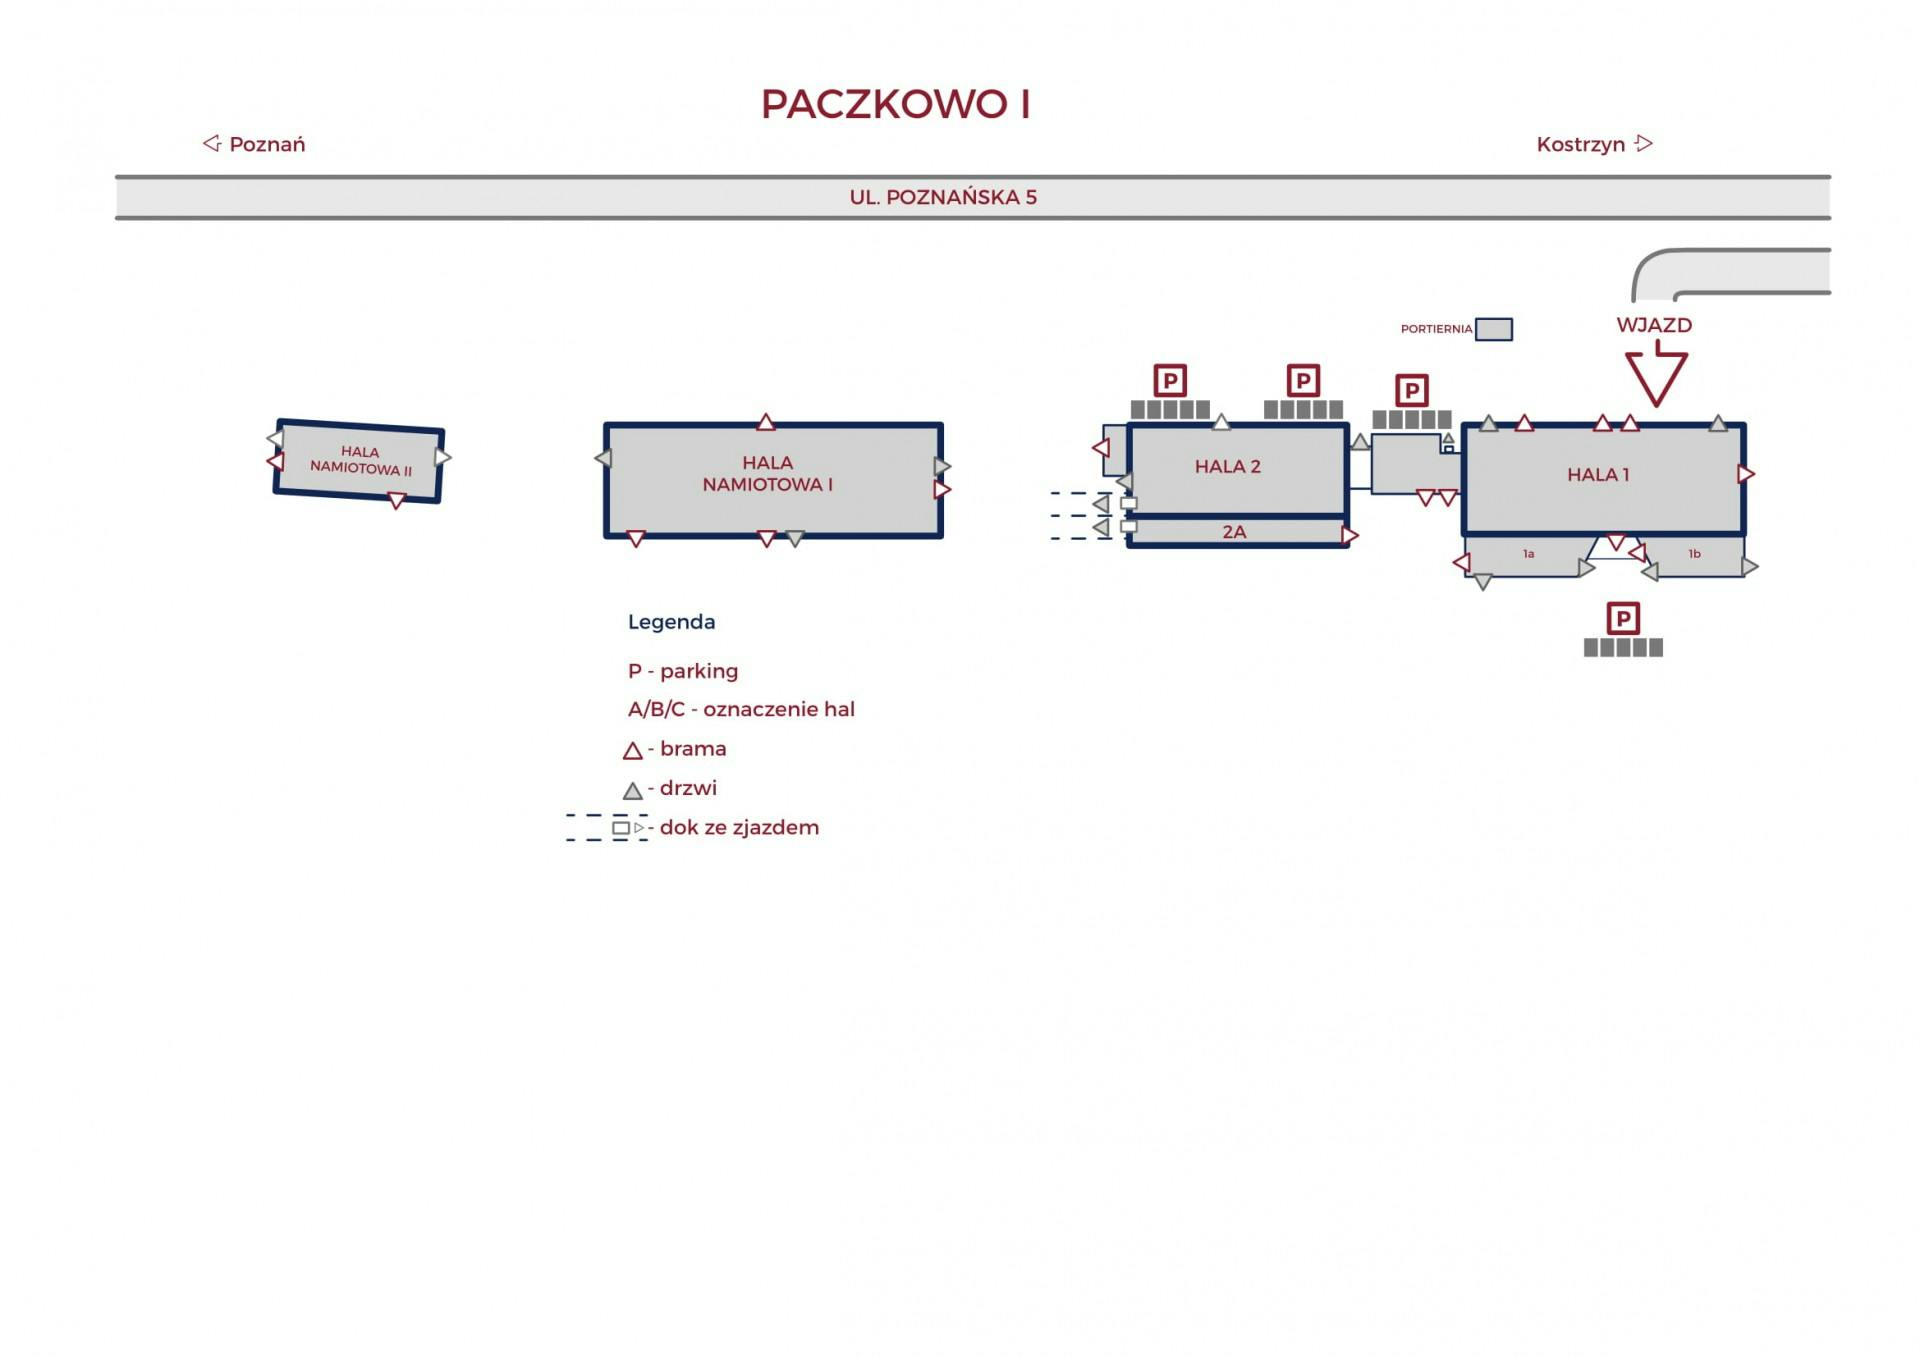 Warehouses for rent in Warehouses Bud-Rental Paczkowo I. Siteplan.